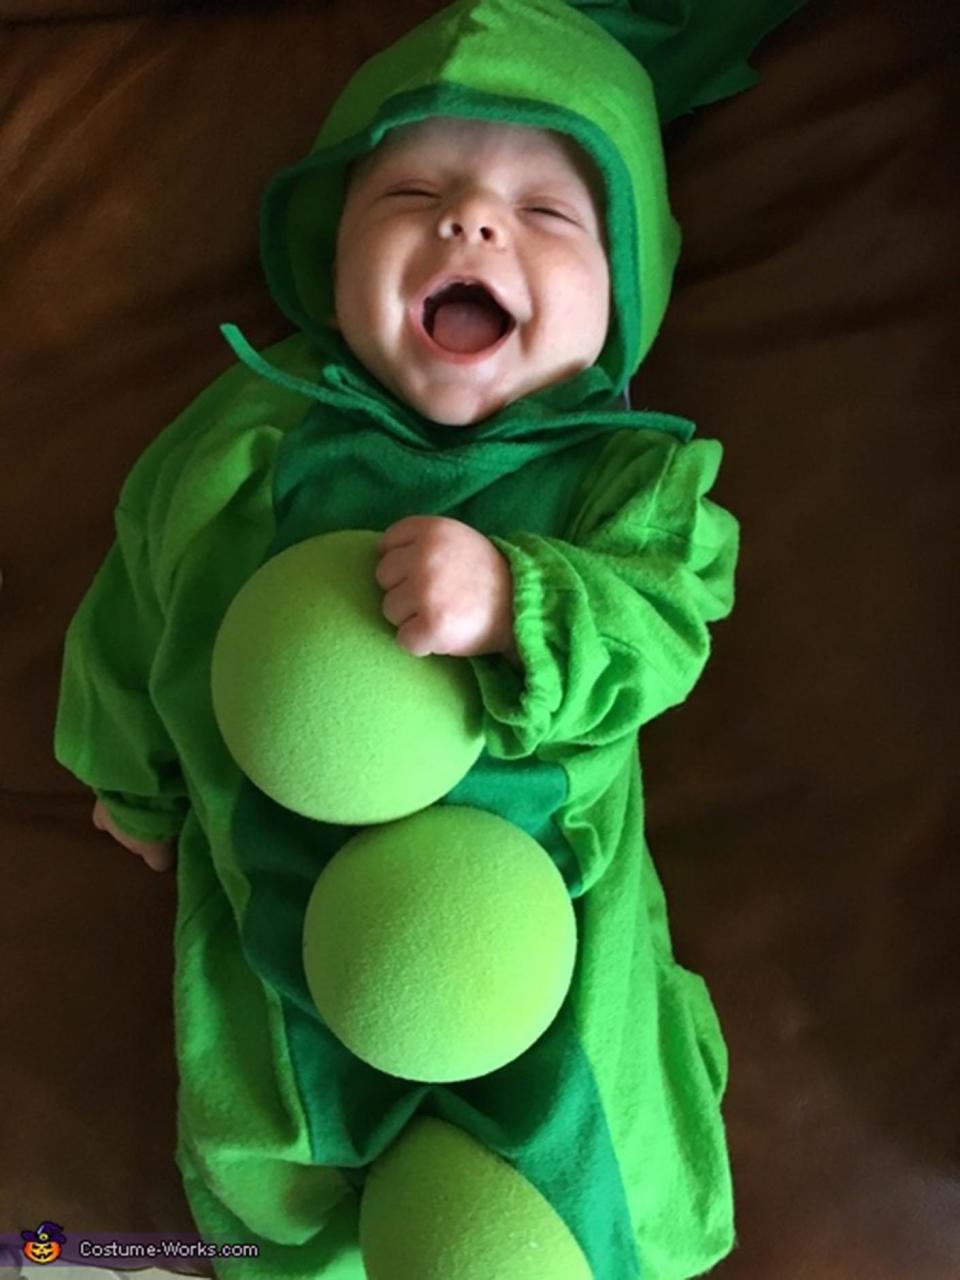 Via <a href="http://www.costume-works.com/costumes_for_babies/peapod-baby.html" target="_blank">Costume Works</a>